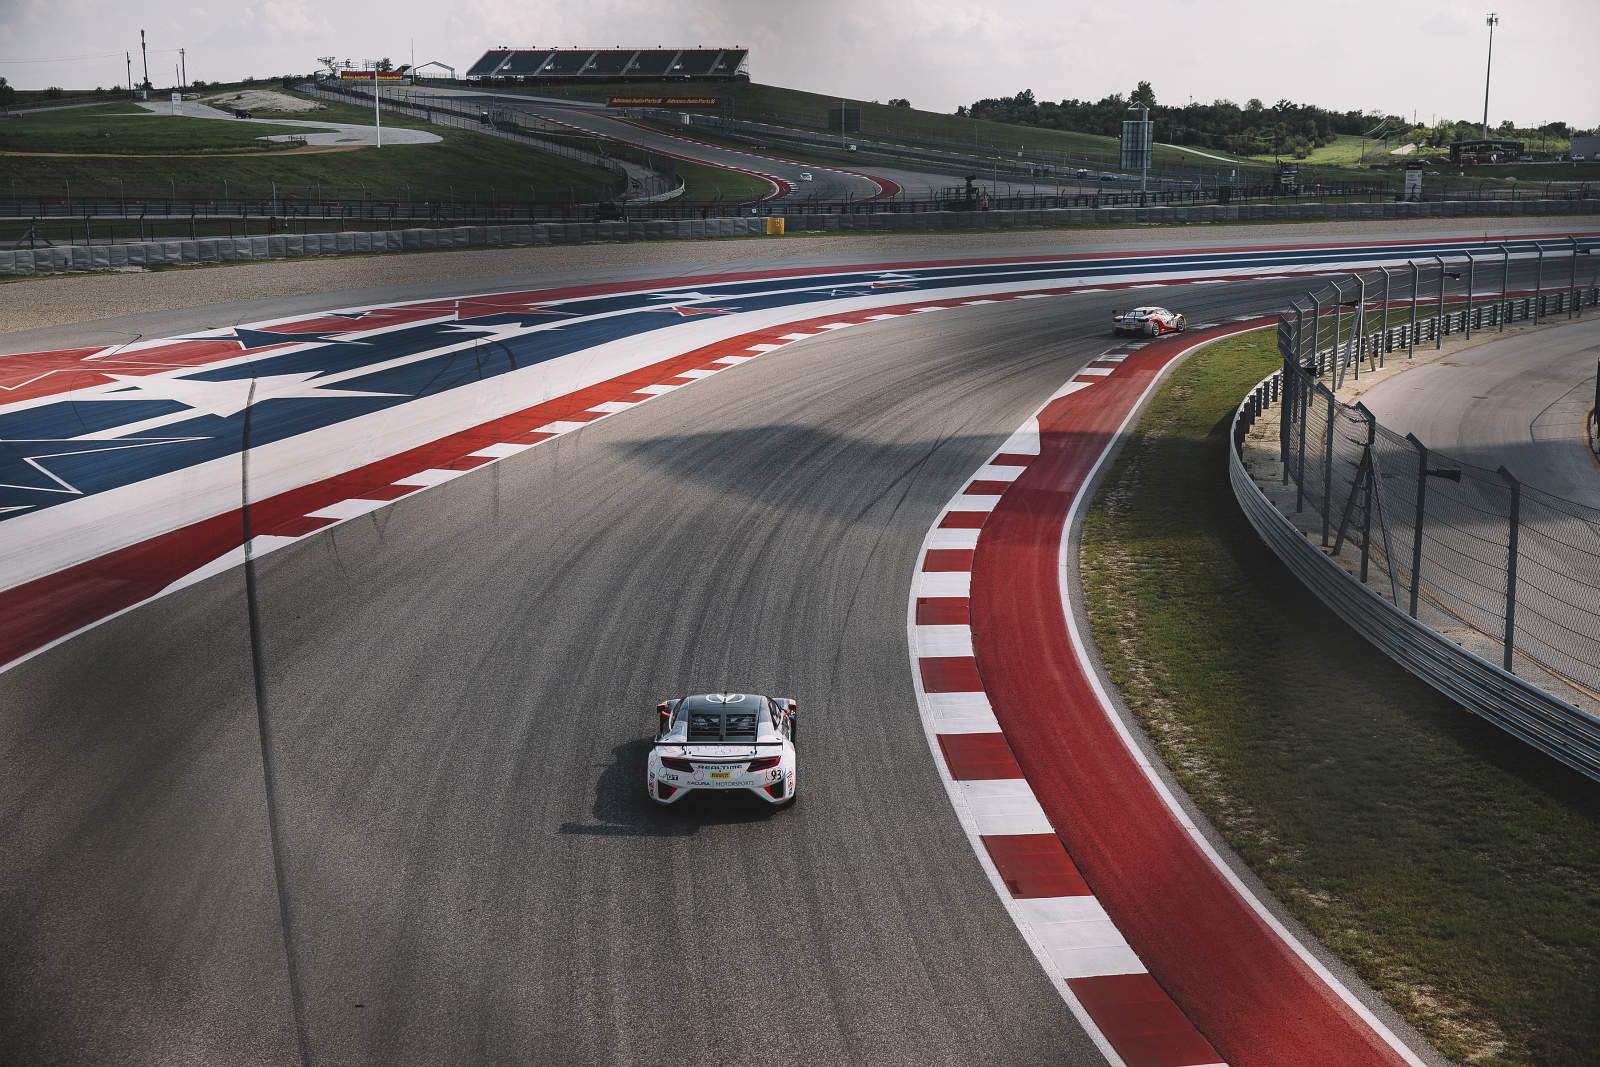 RealTime Acura Wraps up Sprint-X Schedule with Robust Finishes